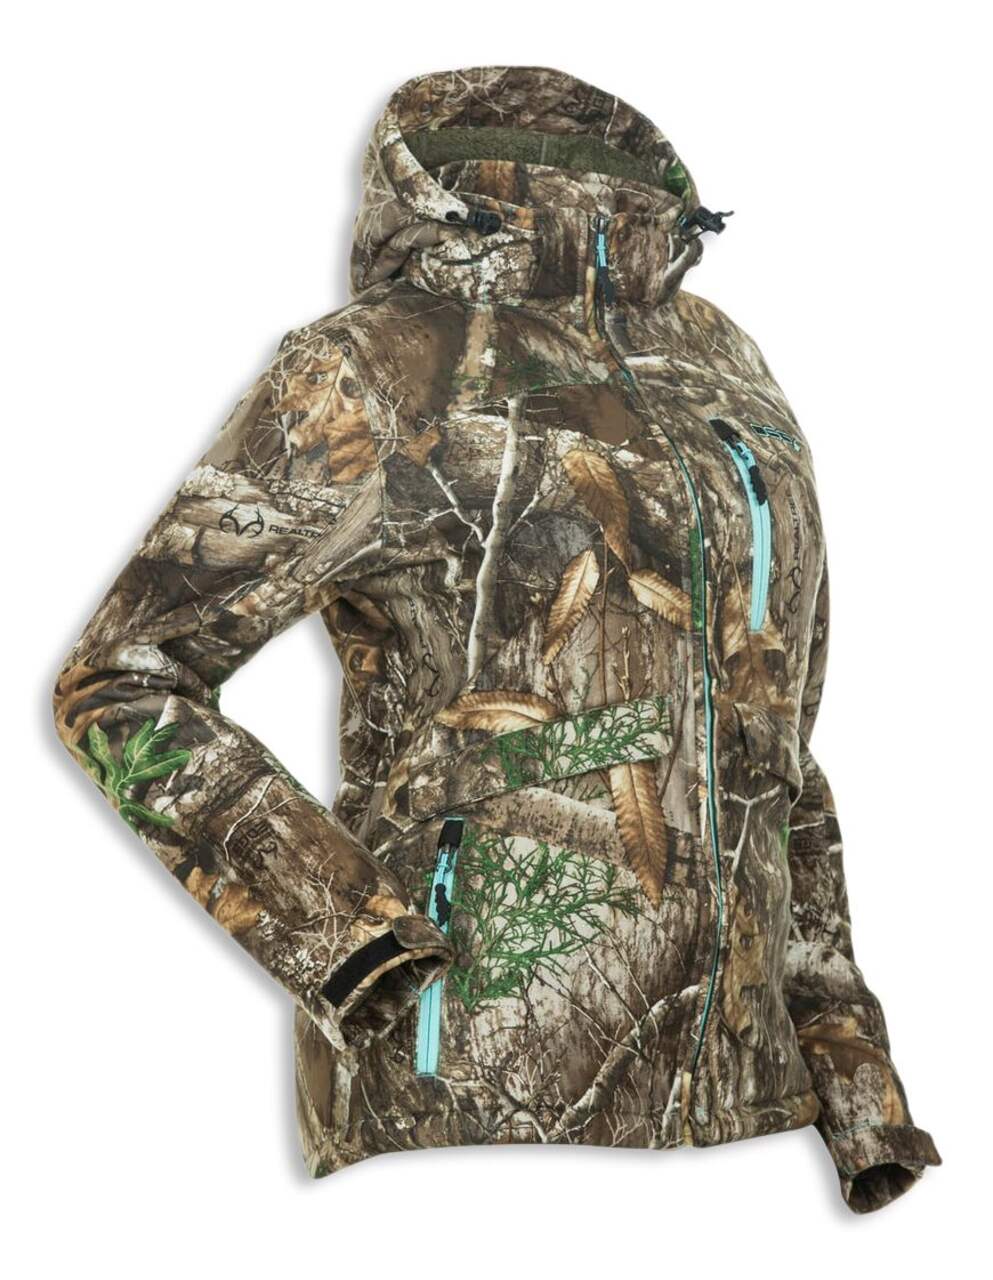 DSG Women's Softshell 2.0 Water-Resistant Hooded Hunting Jacket